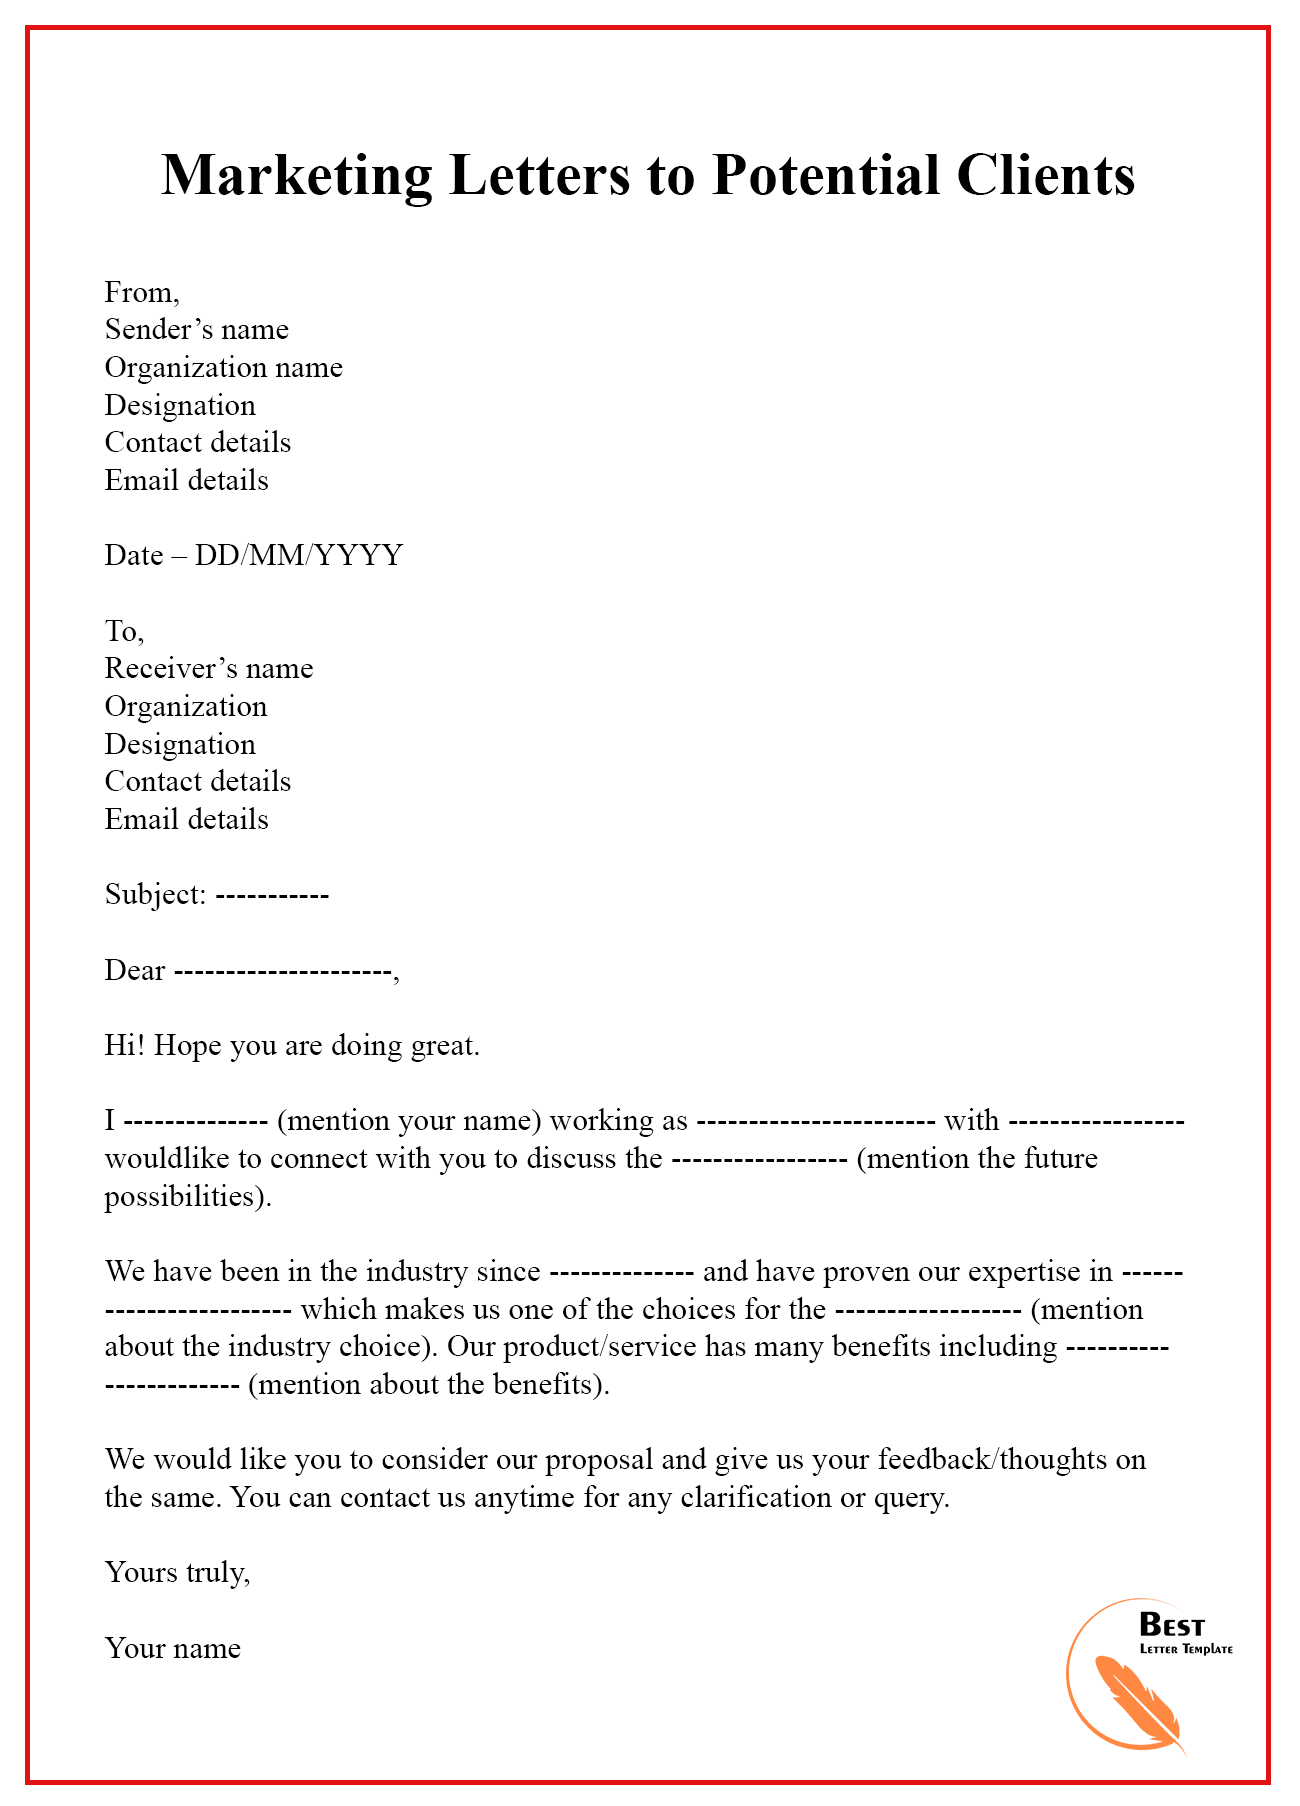 Sample Marketing Letter To Potential Clients from bestlettertemplate.com